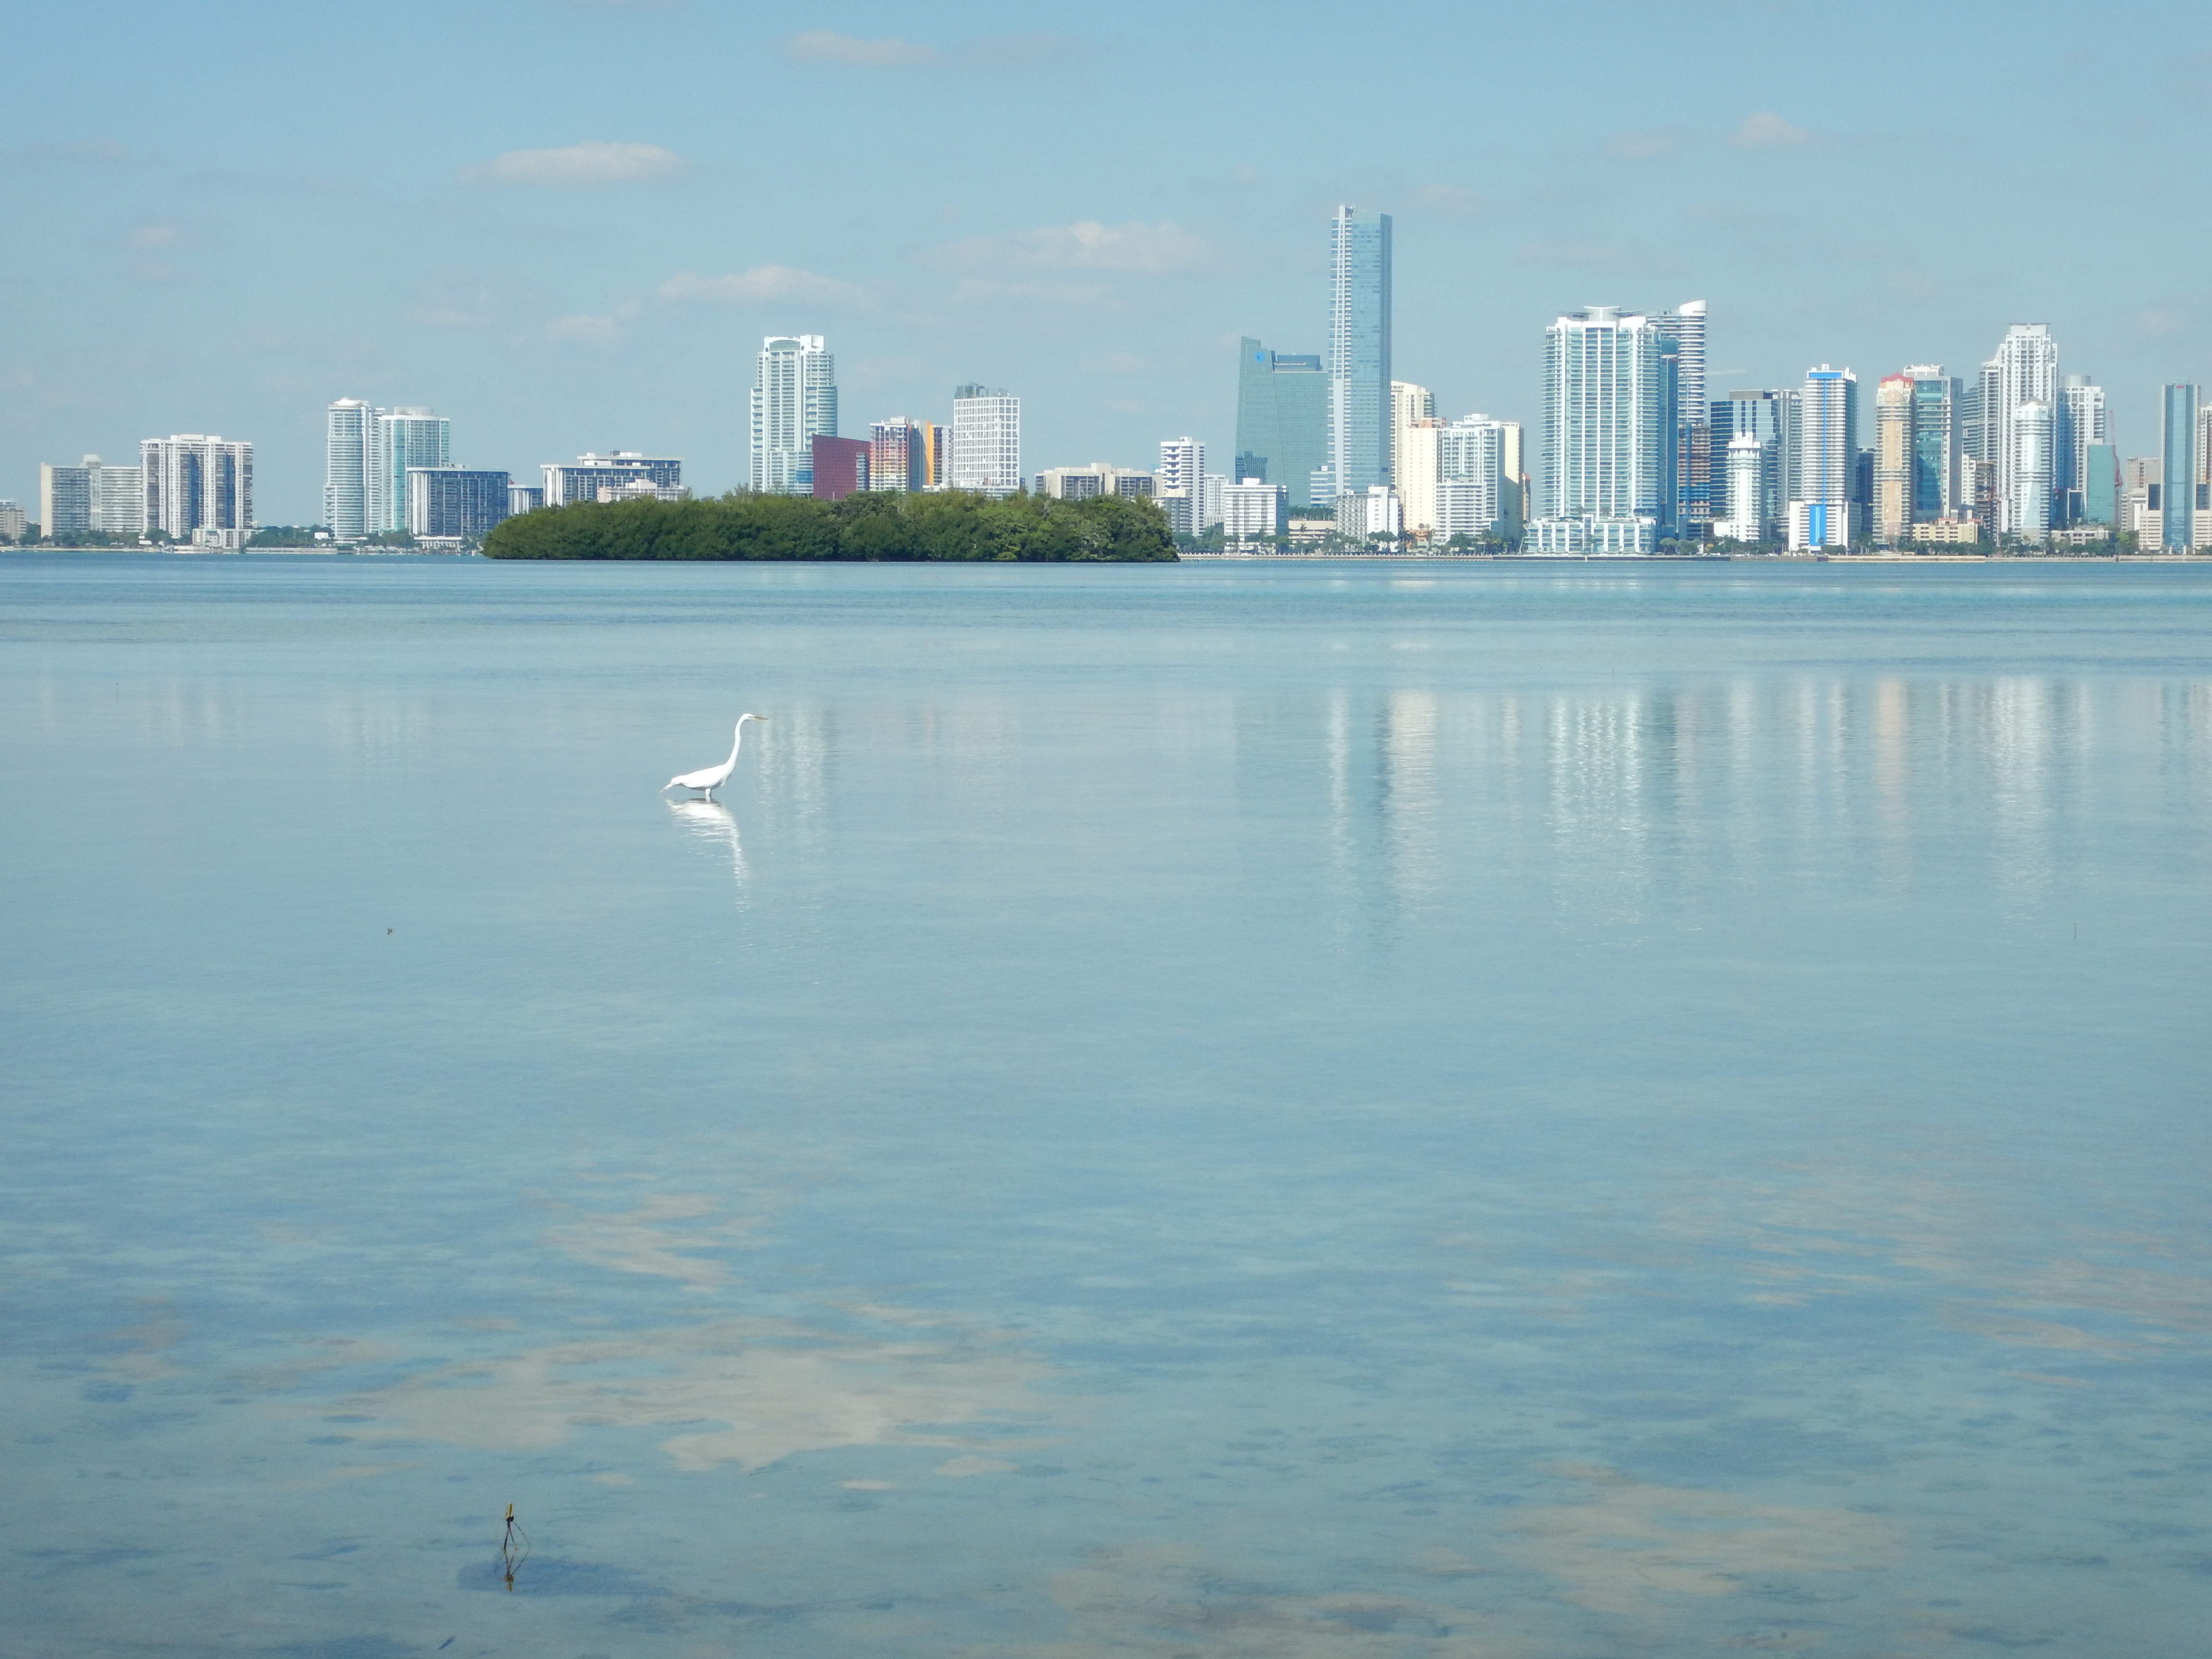 Miami-Dade County Takes Steps Towards Climate Resilience